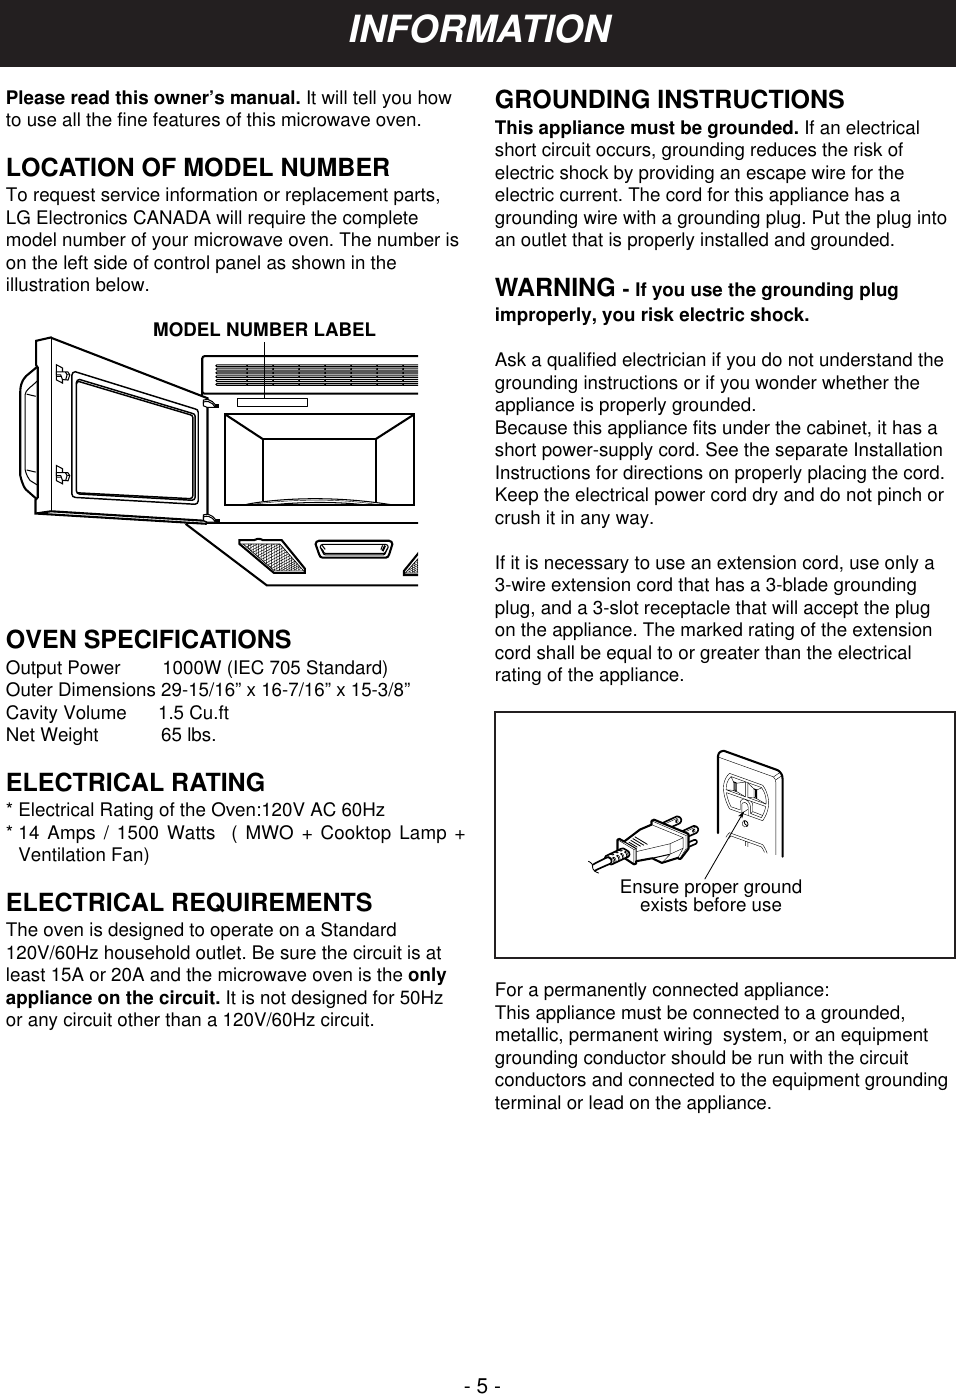 - 5 -Please read this owner’s manual. It will tell you howto use all the fine features of this microwave oven. LOCATION OF MODEL NUMBERTo request service information or replacement parts,LG Electronics CANADA will require the completemodel number of your microwave oven. The number ison the left side of control panel as shown in theillustration below.OVEN SPECIFICATIONSOutput Power        1000W (IEC 705 Standard)Outer Dimensions 29-15/16” x 16-7/16” x 15-3/8”Cavity Volume      1.5 Cu.ftNet Weight            65 lbs.ELECTRICAL RATING* Electrical Rating of the Oven:120V AC 60Hz* 14 Amps / 1500 Watts  ( MWO + Cooktop Lamp +Ventilation Fan)ELECTRICAL REQUIREMENTSThe oven is designed to operate on a Standard120V/60Hz household outlet. Be sure the circuit is atleast 15A or 20A and the microwave oven is the onlyappliance on the circuit. It is not designed for 50Hzor any circuit other than a 120V/60Hz circuit.GROUNDING INSTRUCTIONSThis appliance must be grounded. If an electricalshort circuit occurs, grounding reduces the risk ofelectric shock by providing an escape wire for theelectric current. The cord for this appliance has agrounding wire with a grounding plug. Put the plug intoan outlet that is properly installed and grounded.WARNING - If you use the grounding plugimproperly, you risk electric shock.Ask a qualified electrician if you do not understand thegrounding instructions or if you wonder whether theappliance is properly grounded.Because this appliance fits under the cabinet, it has ashort power-supply cord. See the separate InstallationInstructions for directions on properly placing the cord.Keep the electrical power cord dry and do not pinch orcrush it in any way.If it is necessary to use an extension cord, use only a3-wire extension cord that has a 3-blade groundingplug, and a 3-slot receptacle that will accept the plugon the appliance. The marked rating of the extensioncord shall be equal to or greater than the electricalrating of the appliance.For a permanently connected appliance:This appliance must be connected to a grounded,metallic, permanent wiring  system, or an equipmentgrounding conductor should be run with the circuitconductors and connected to the equipment groundingterminal or lead on the appliance.Ensure proper groundexists before useMODEL NUMBER LABELINFORMATION